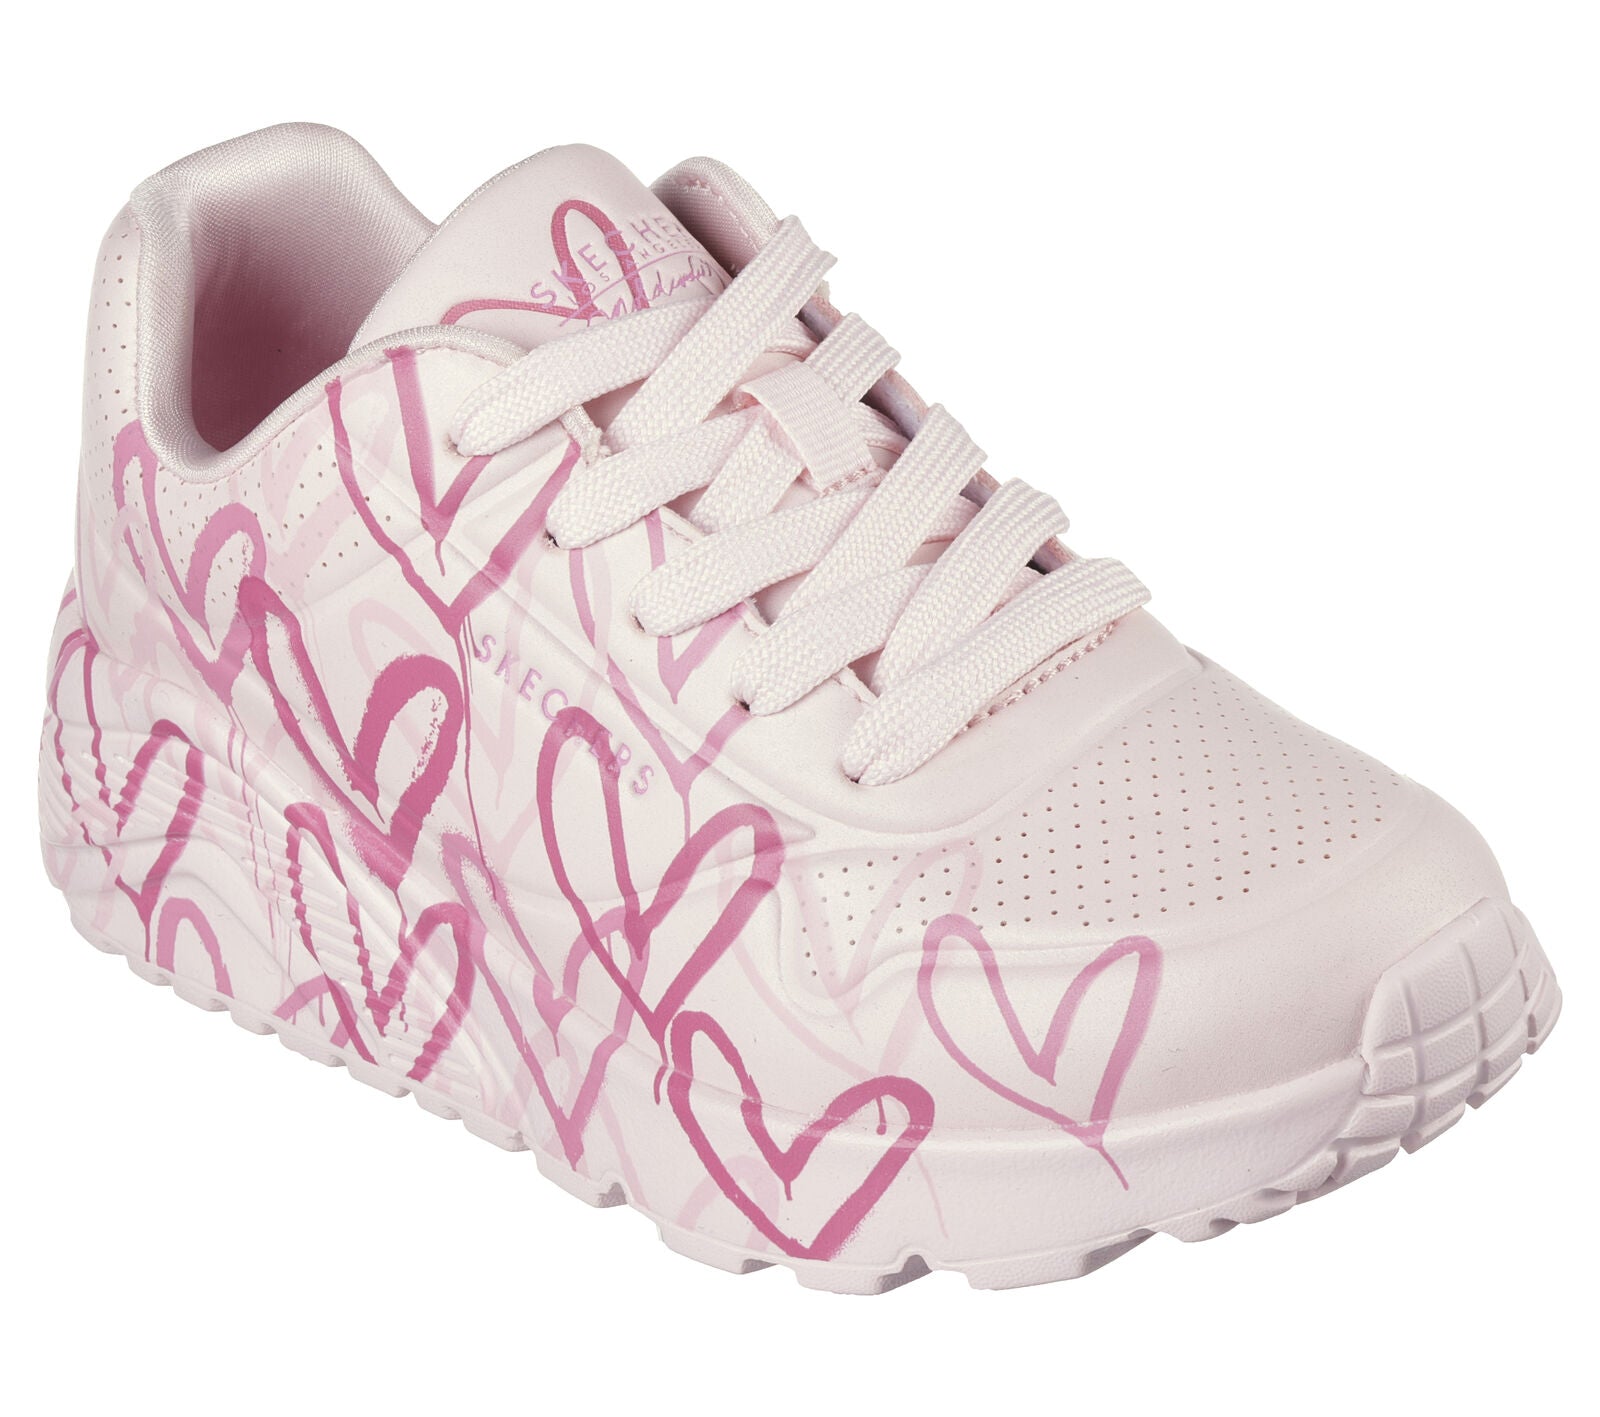 Skechers 314065L Uno Lite Spread The Joy Girls Light Pink Multi Textile Lace Up Trainers